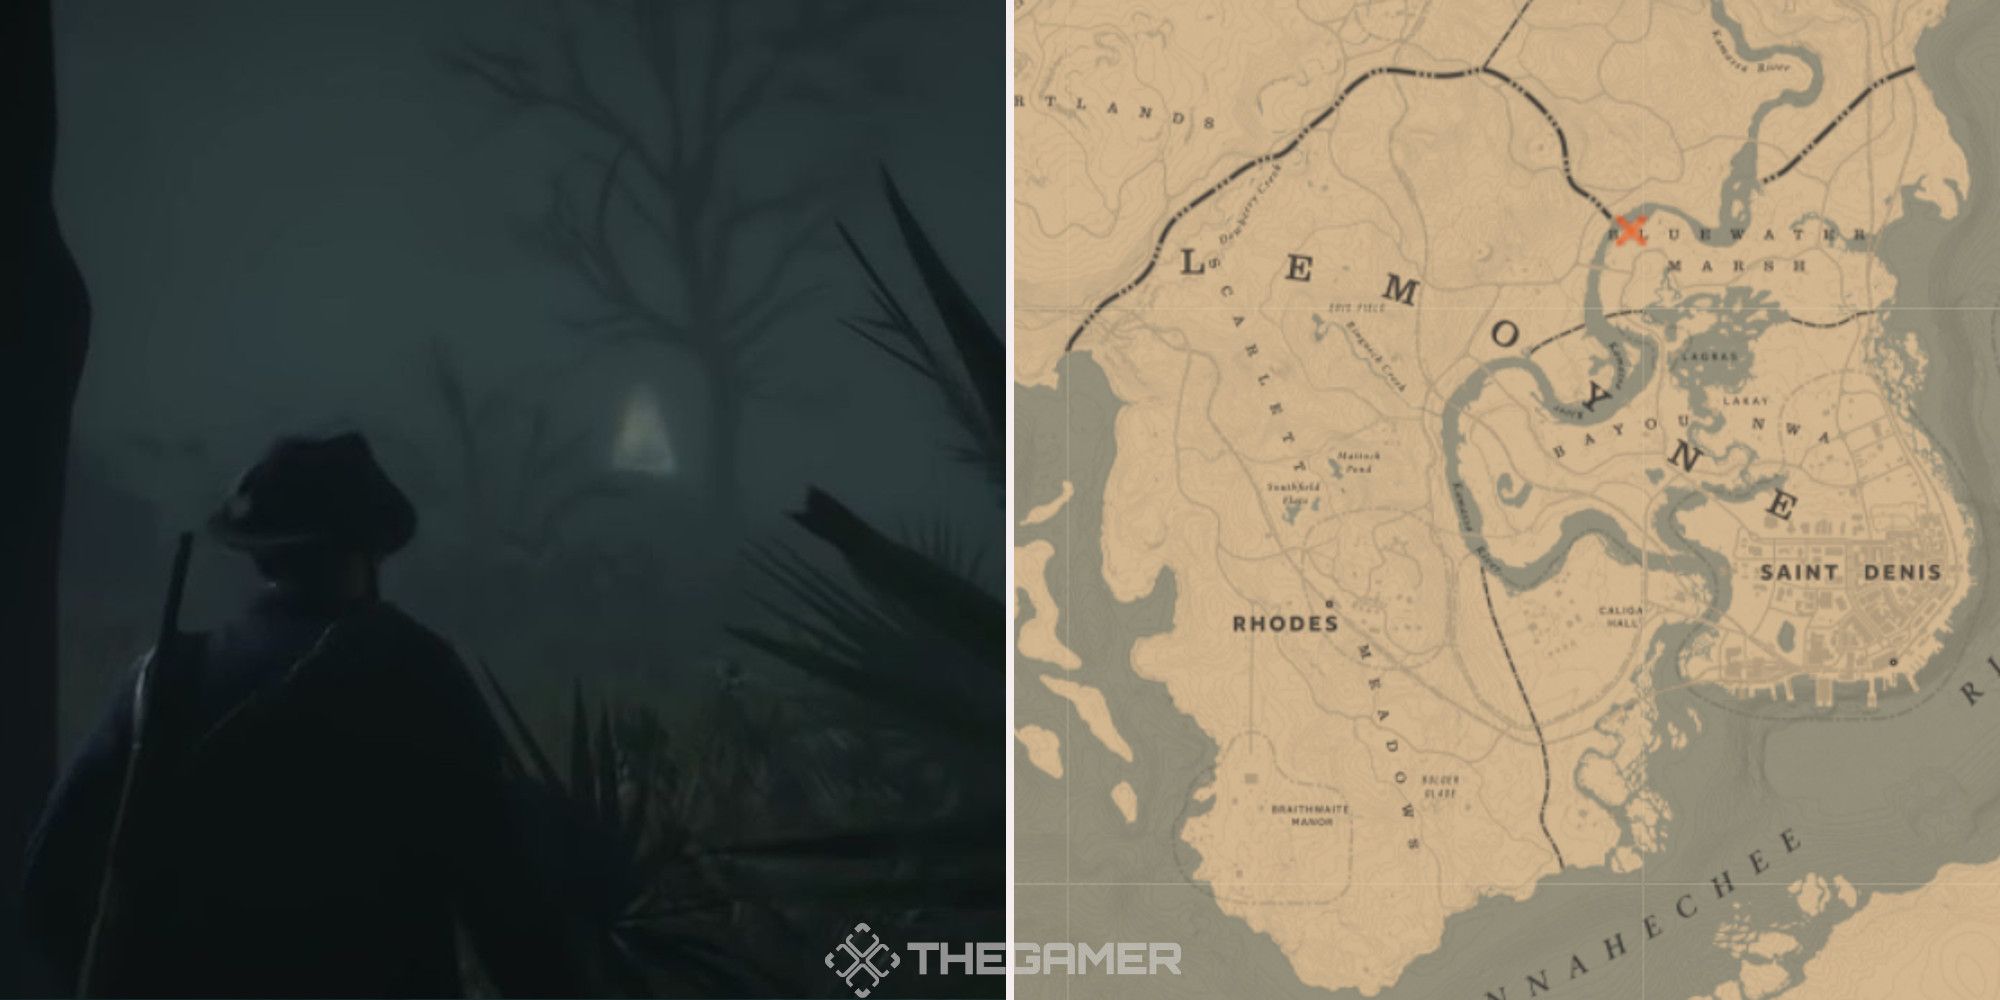 The ghost of Bluewater Marsh, next to an image of where it can be found marked on the map.